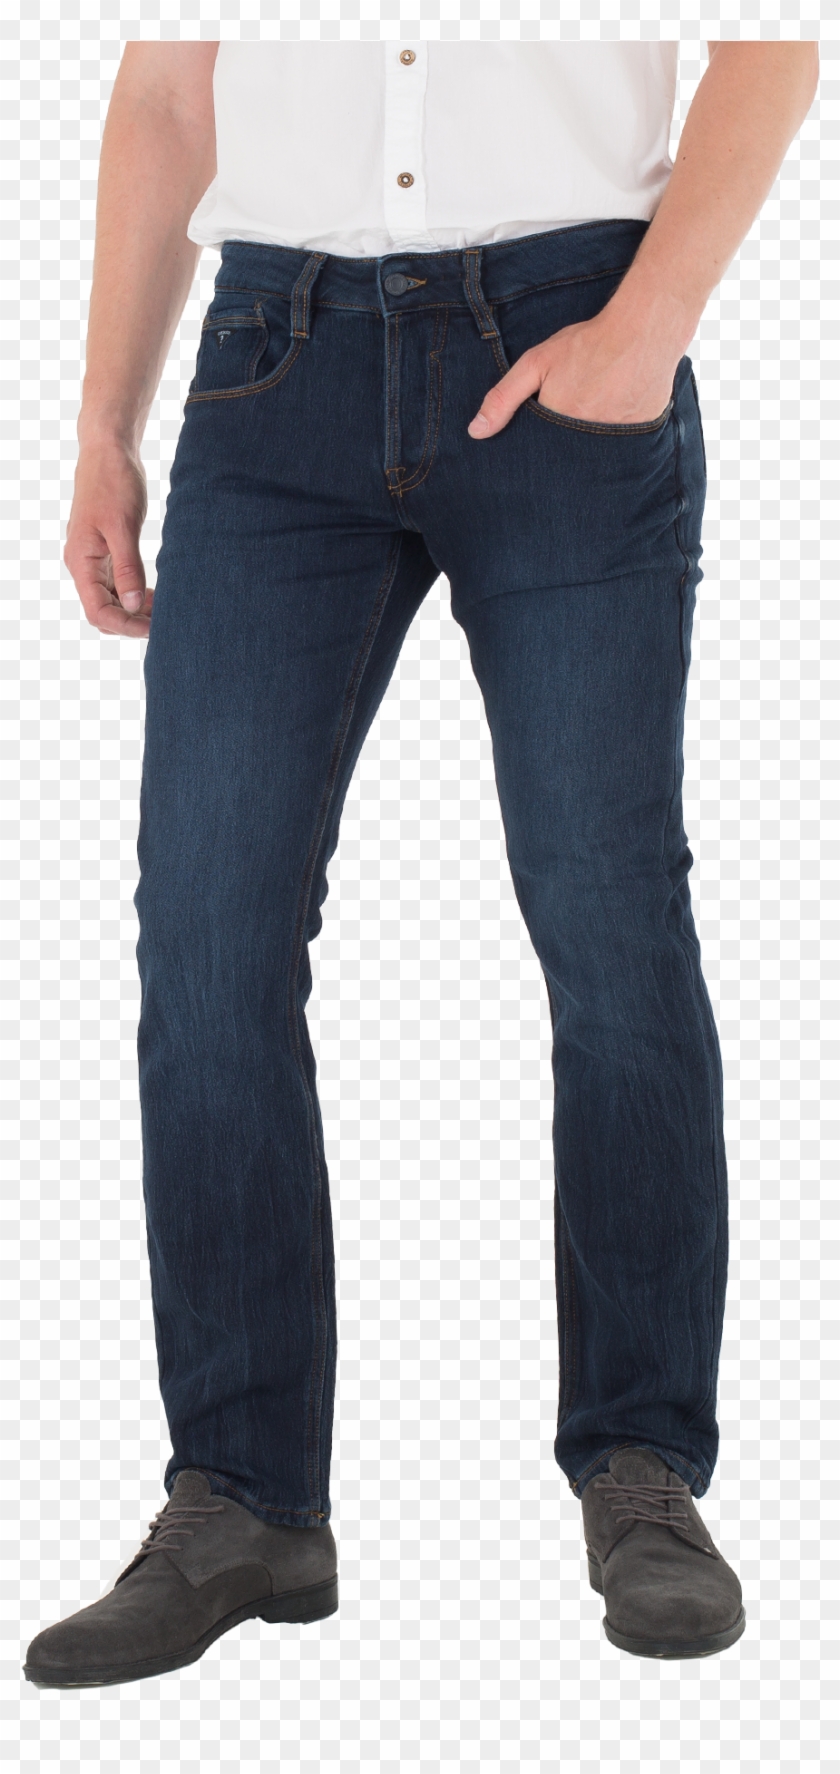 Jeans M73as3 - Quiksilver Relaxed Fit Jeans Clipart #3370332